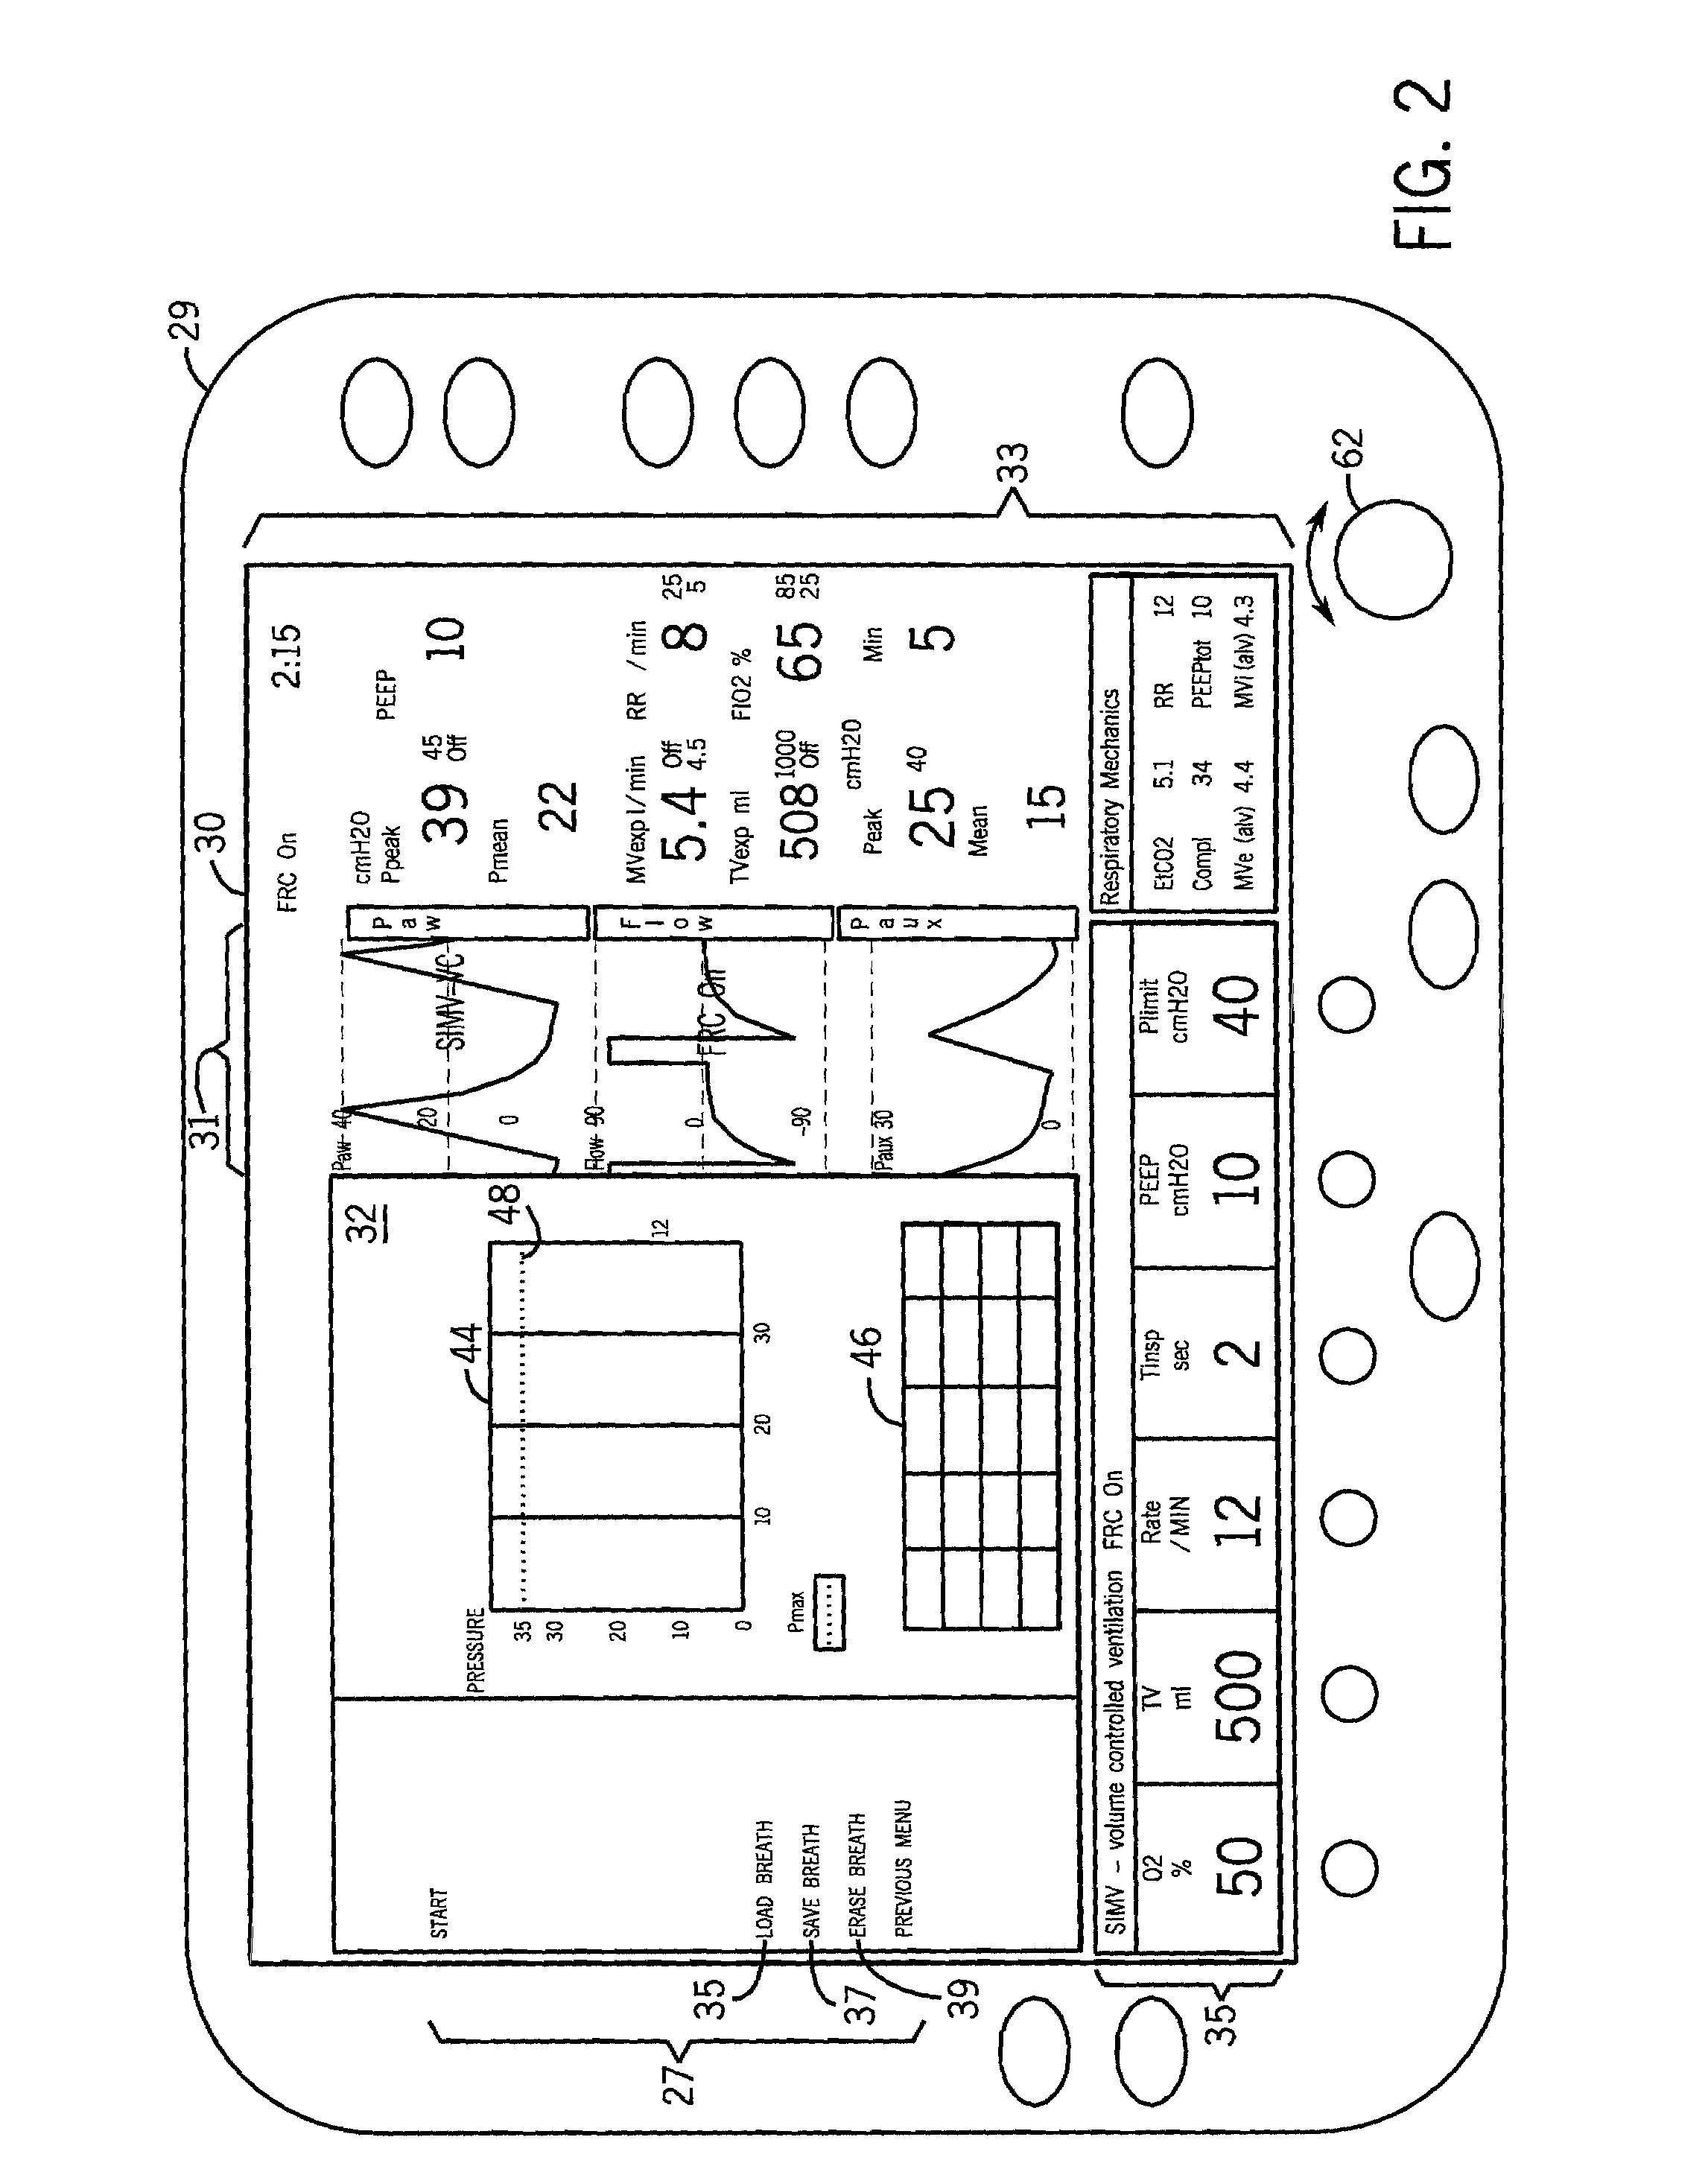 Device and method for graphical mechanical ventilator setup and control